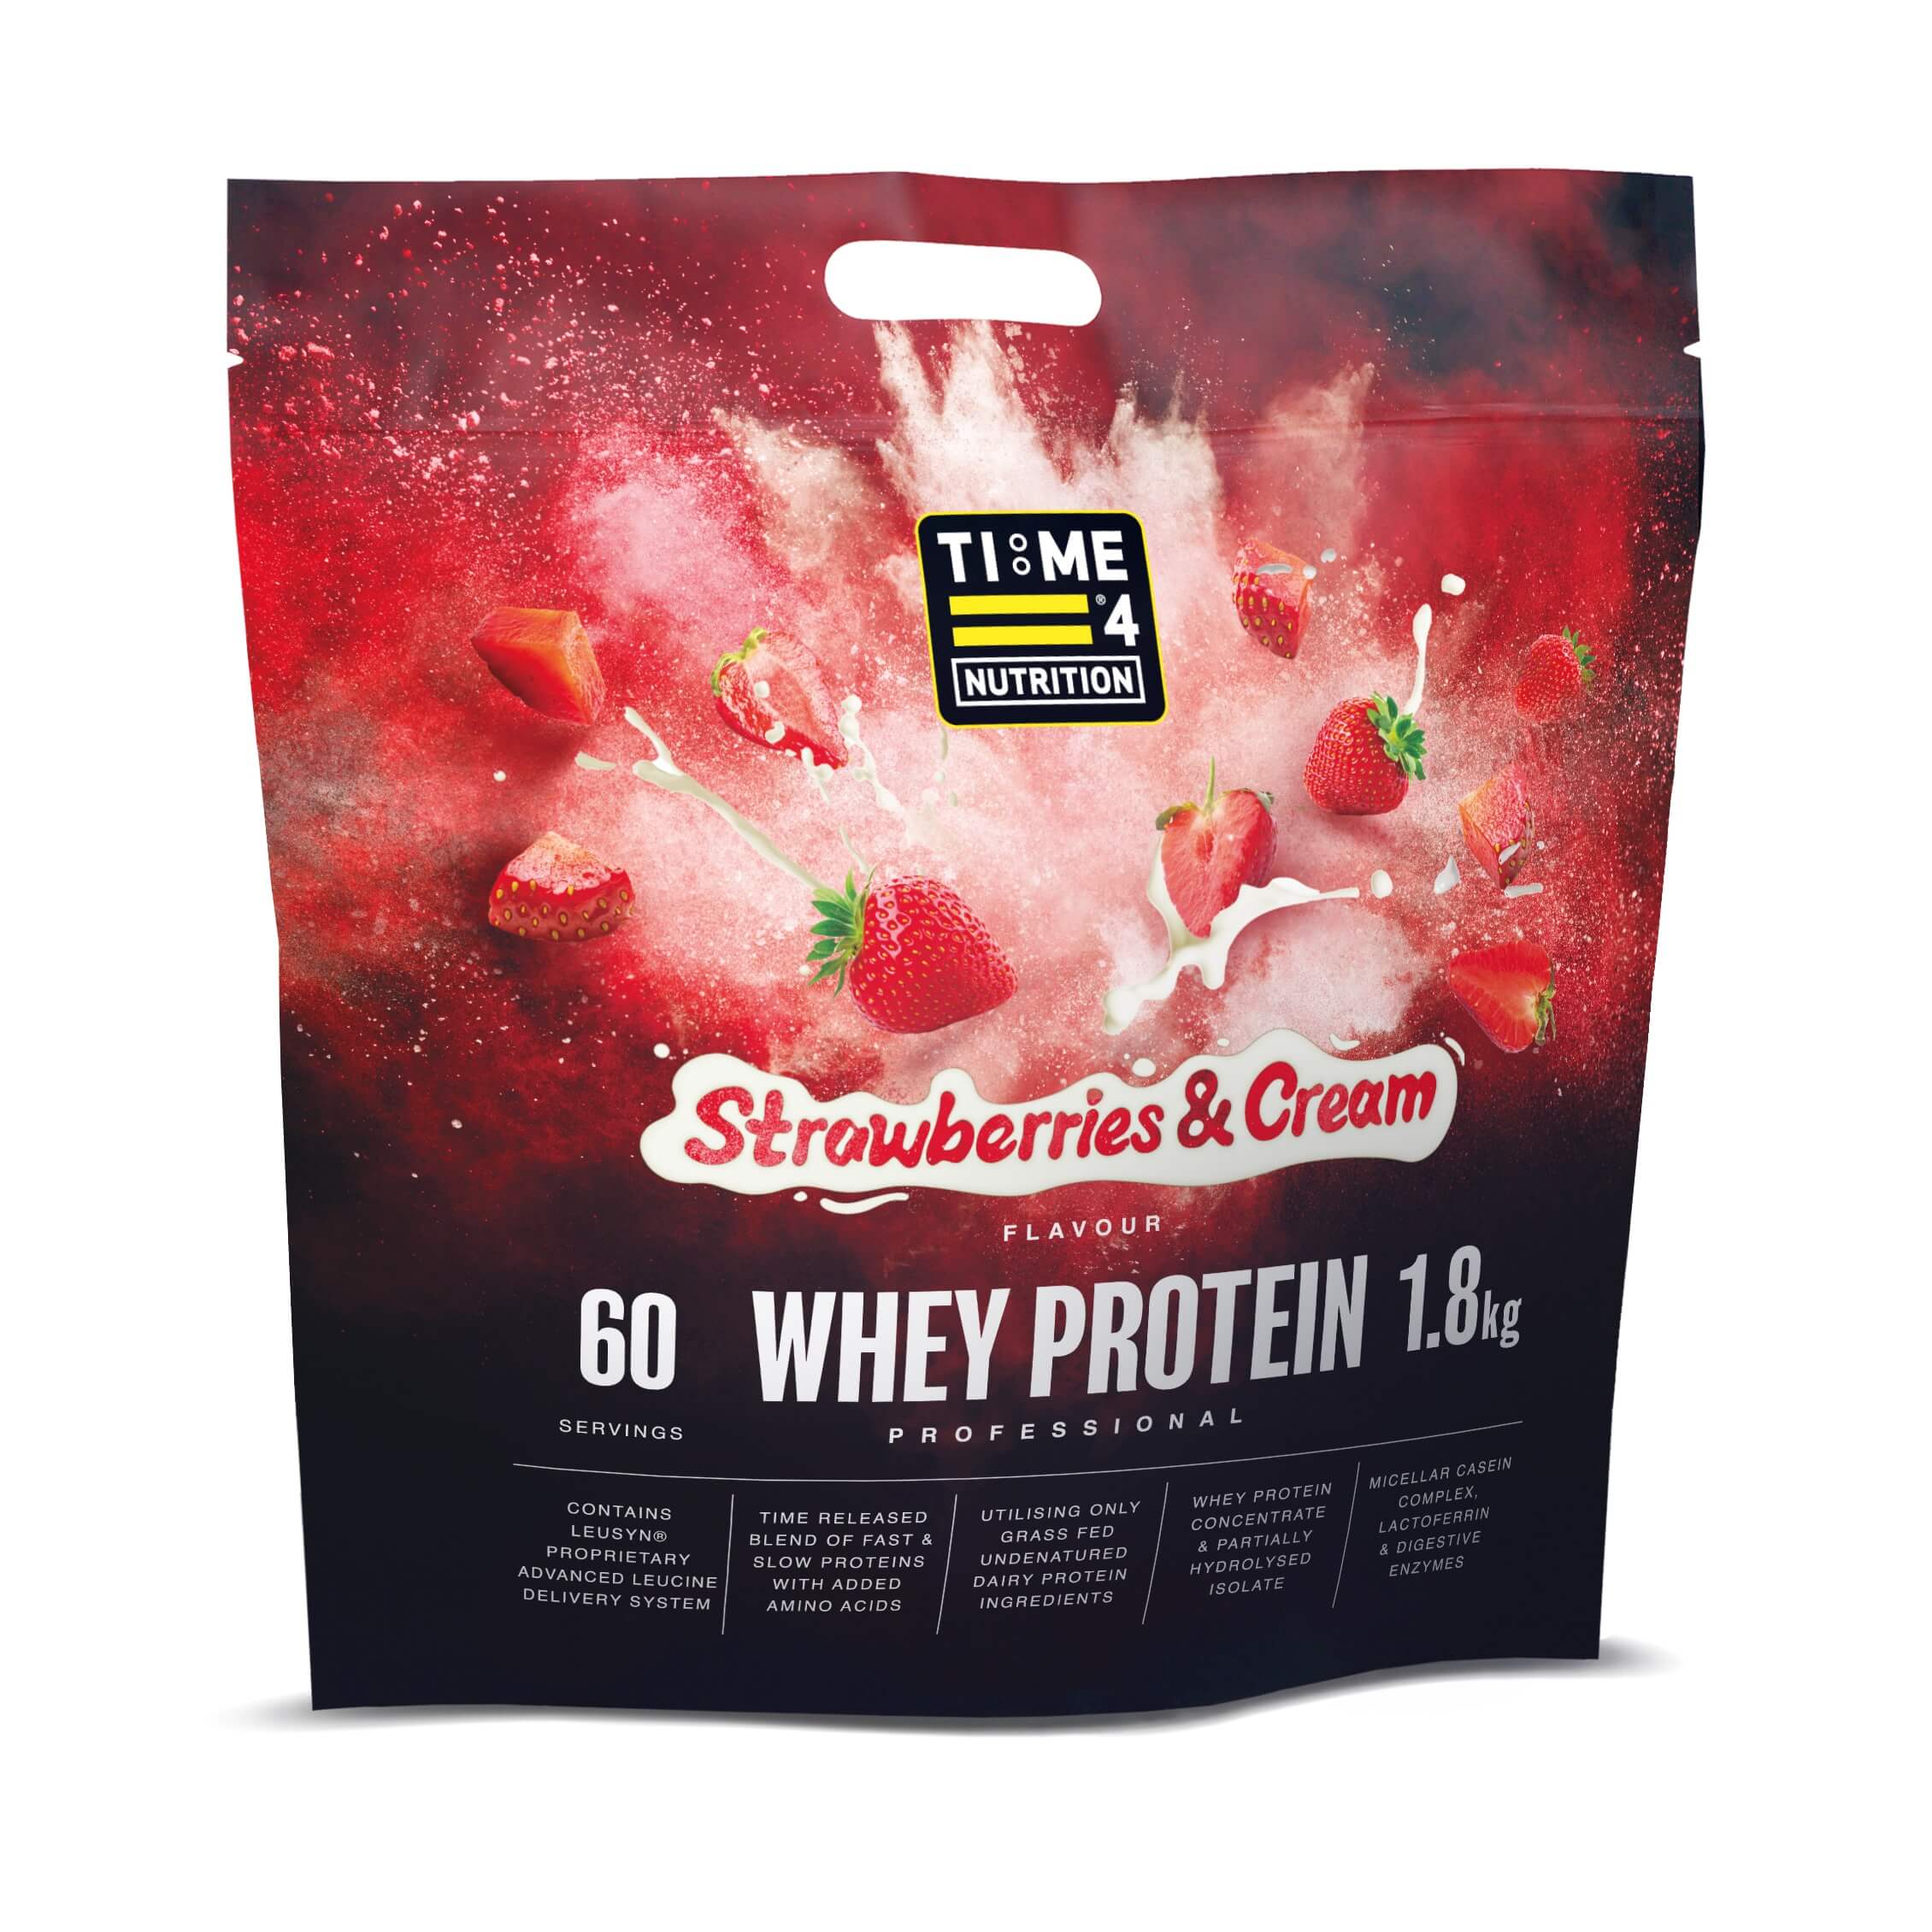 Time 4 whey protein professional single 1.8kg pack strawberries and cream flavour